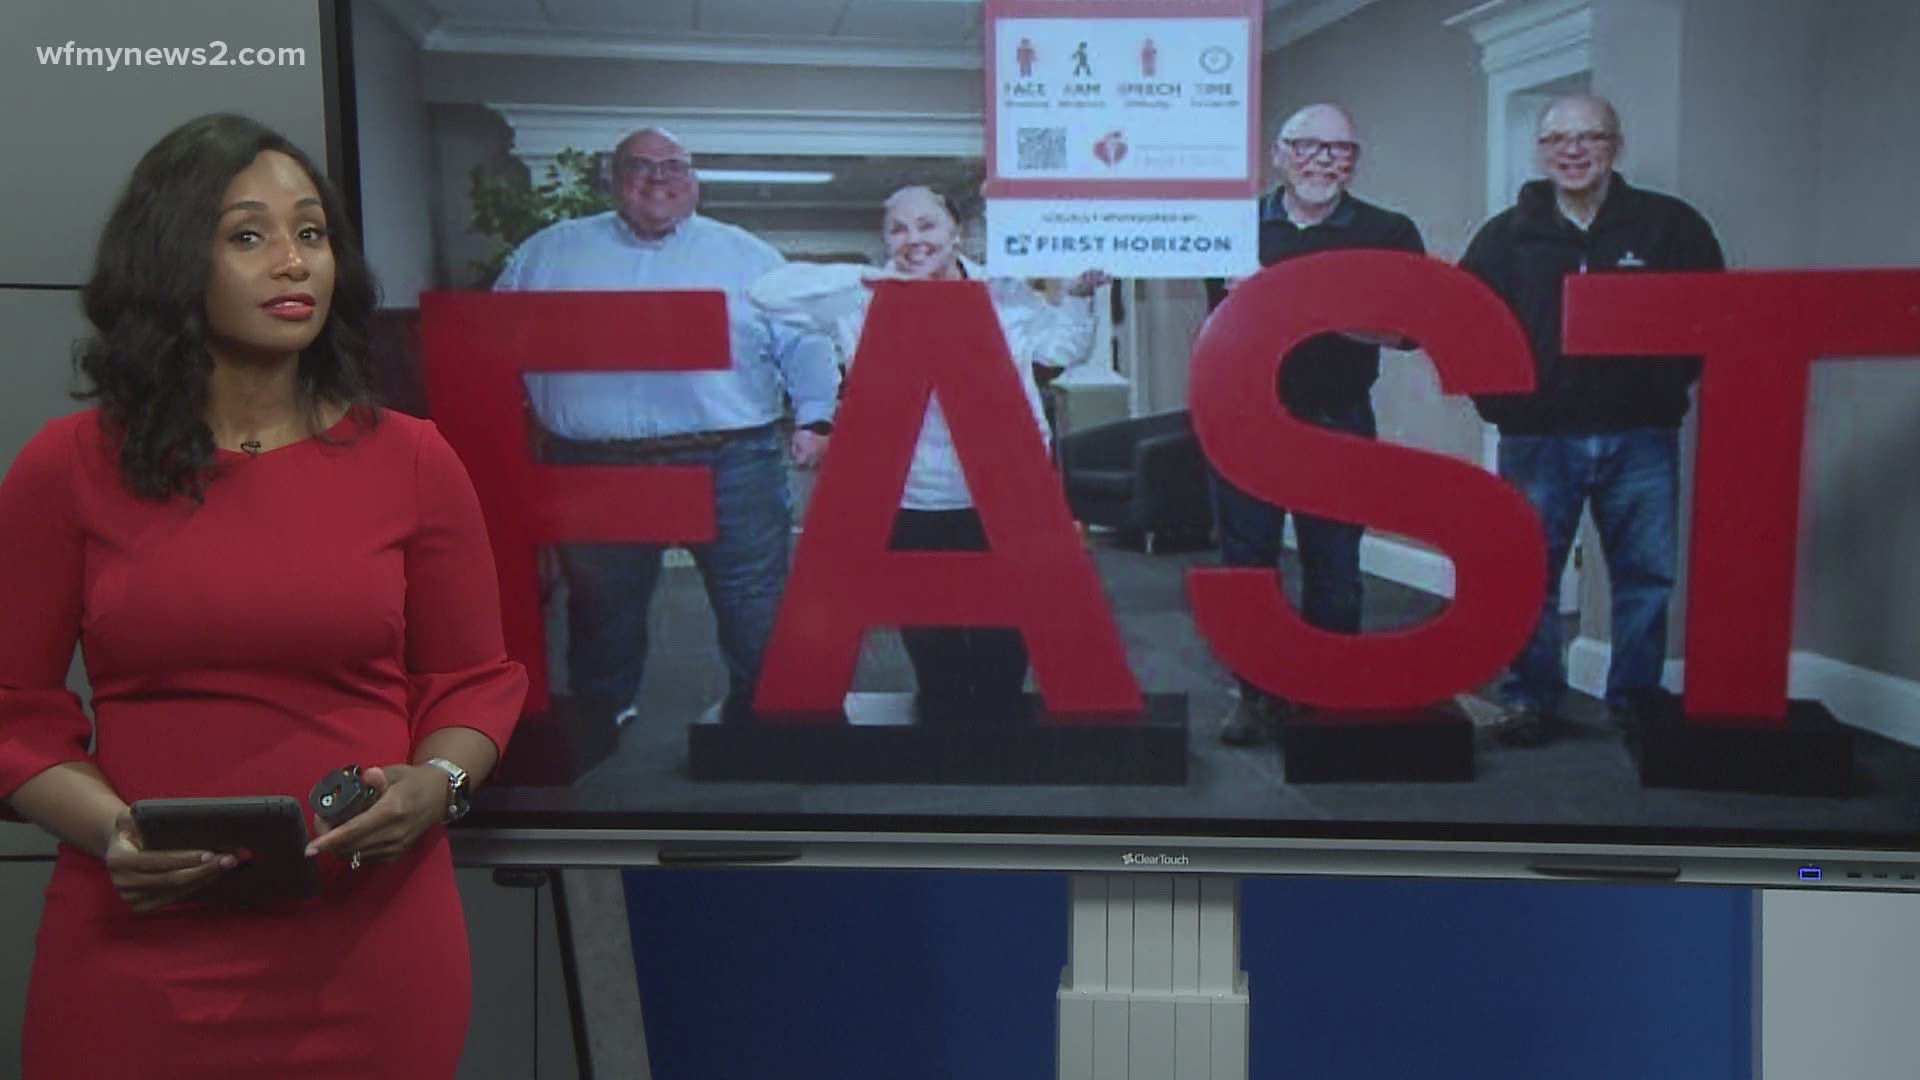 Recognize the signs of a stroke with the acronym F.A.S.T. which stands for Facial drooping, Arm weakness, Speech difficulty and Time to call 9-1-1.